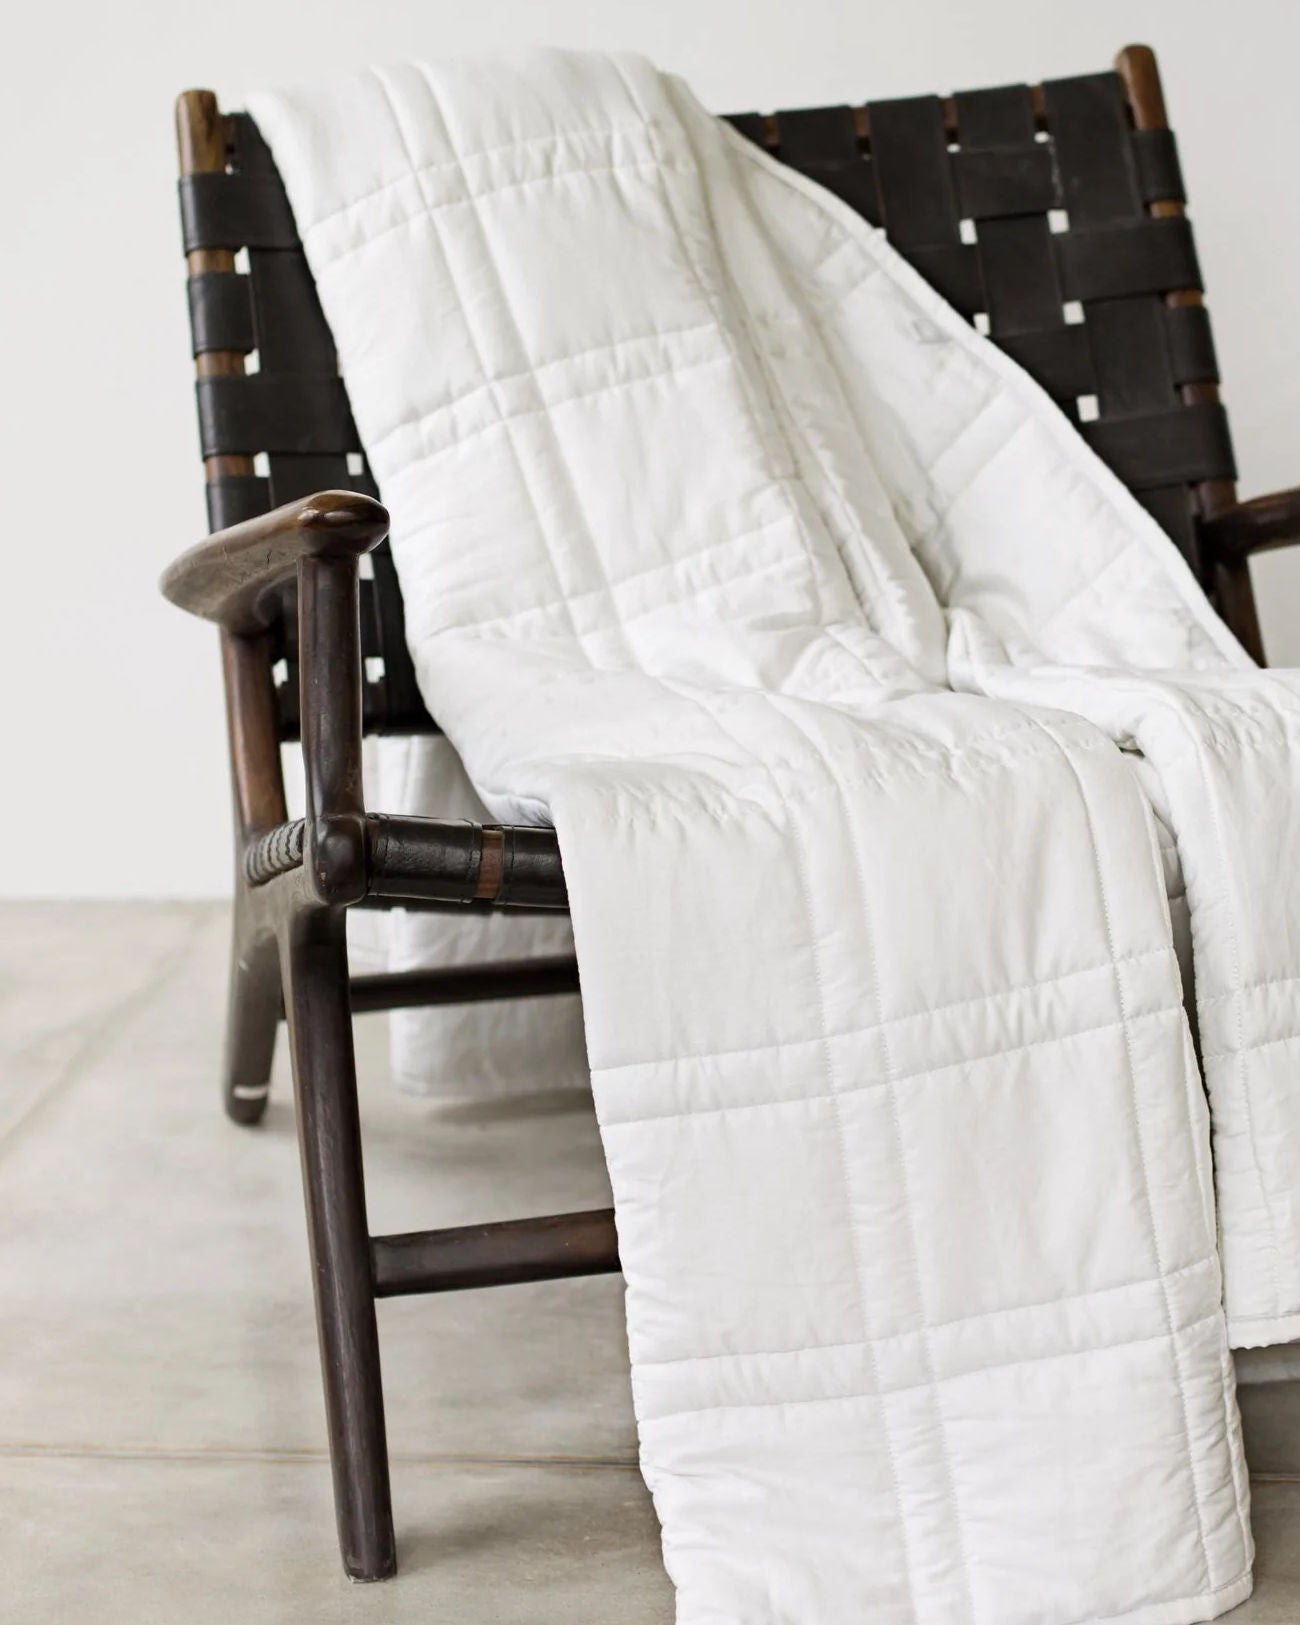 A white Baloo Weighted Blanket draped in a chair.